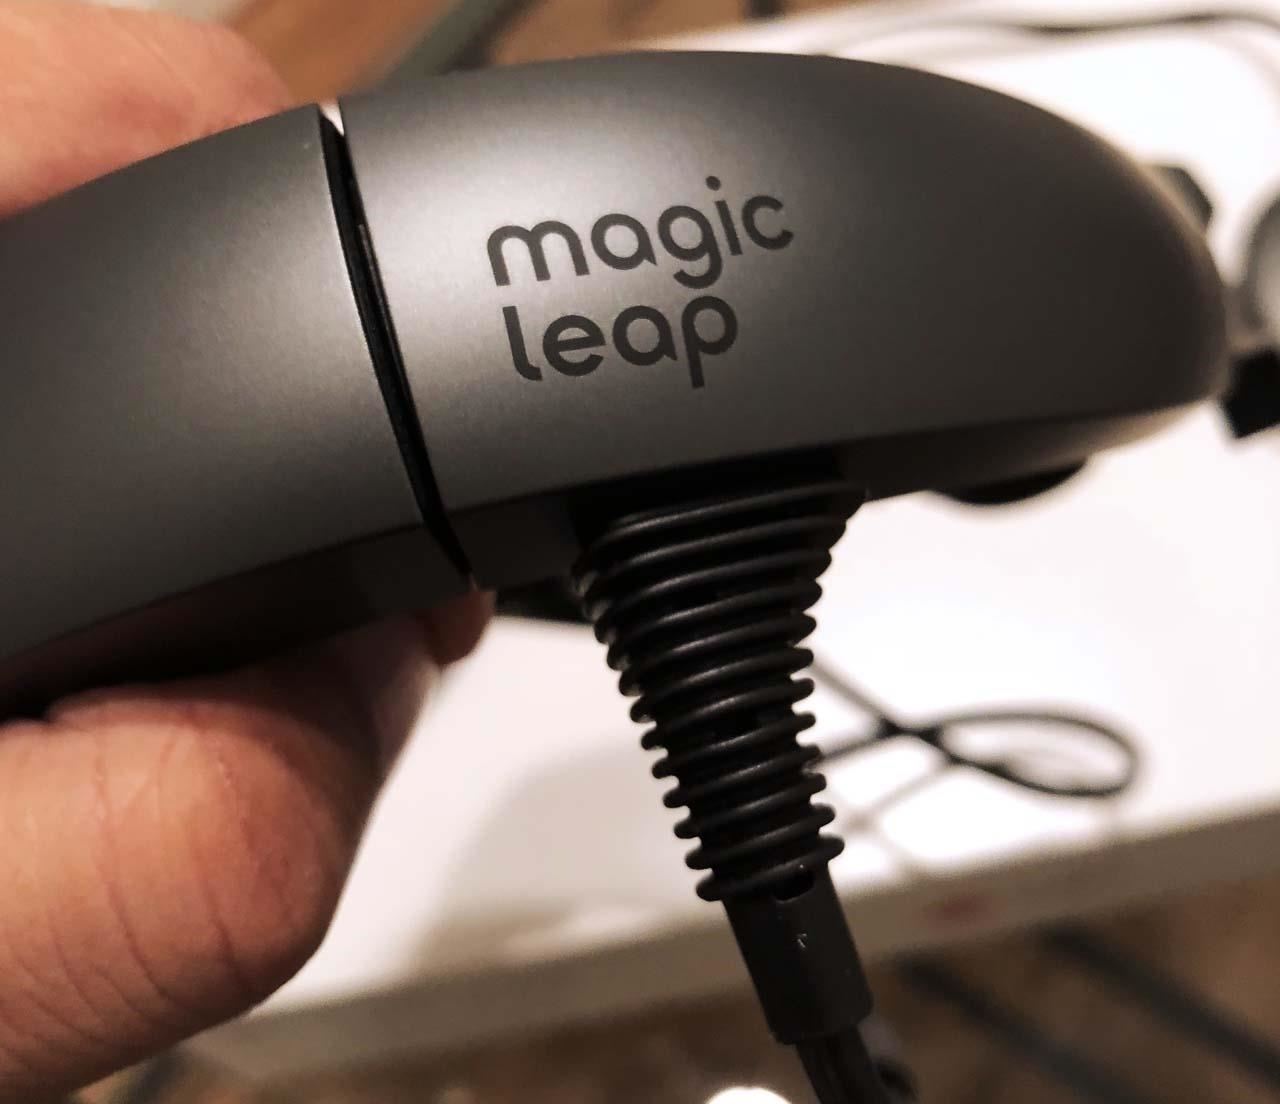 The Ultimate Magic Leap One Unboxing, Every Part, Every Logo, & One Very Special Surprise Treat